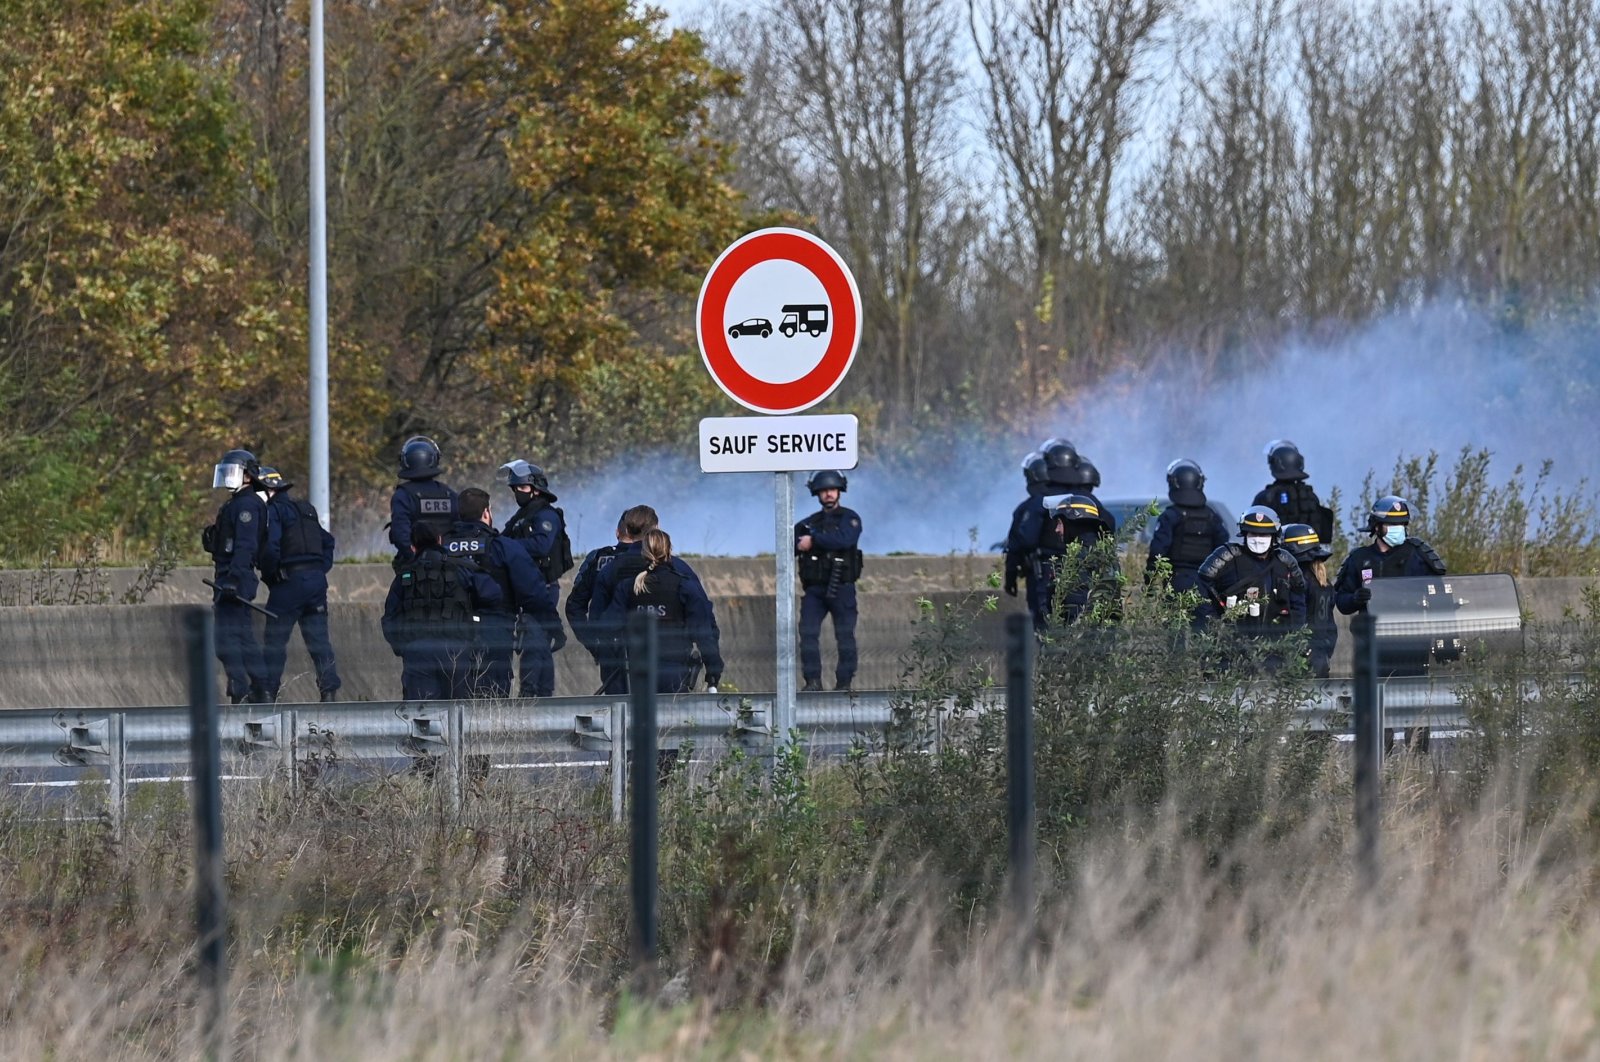 Police push back away from the A16 motorway migrants attempting to climb into the back of lorries bound for Britain, in Calais, northern France, Nov. 19, 2020. (AFP Photo)